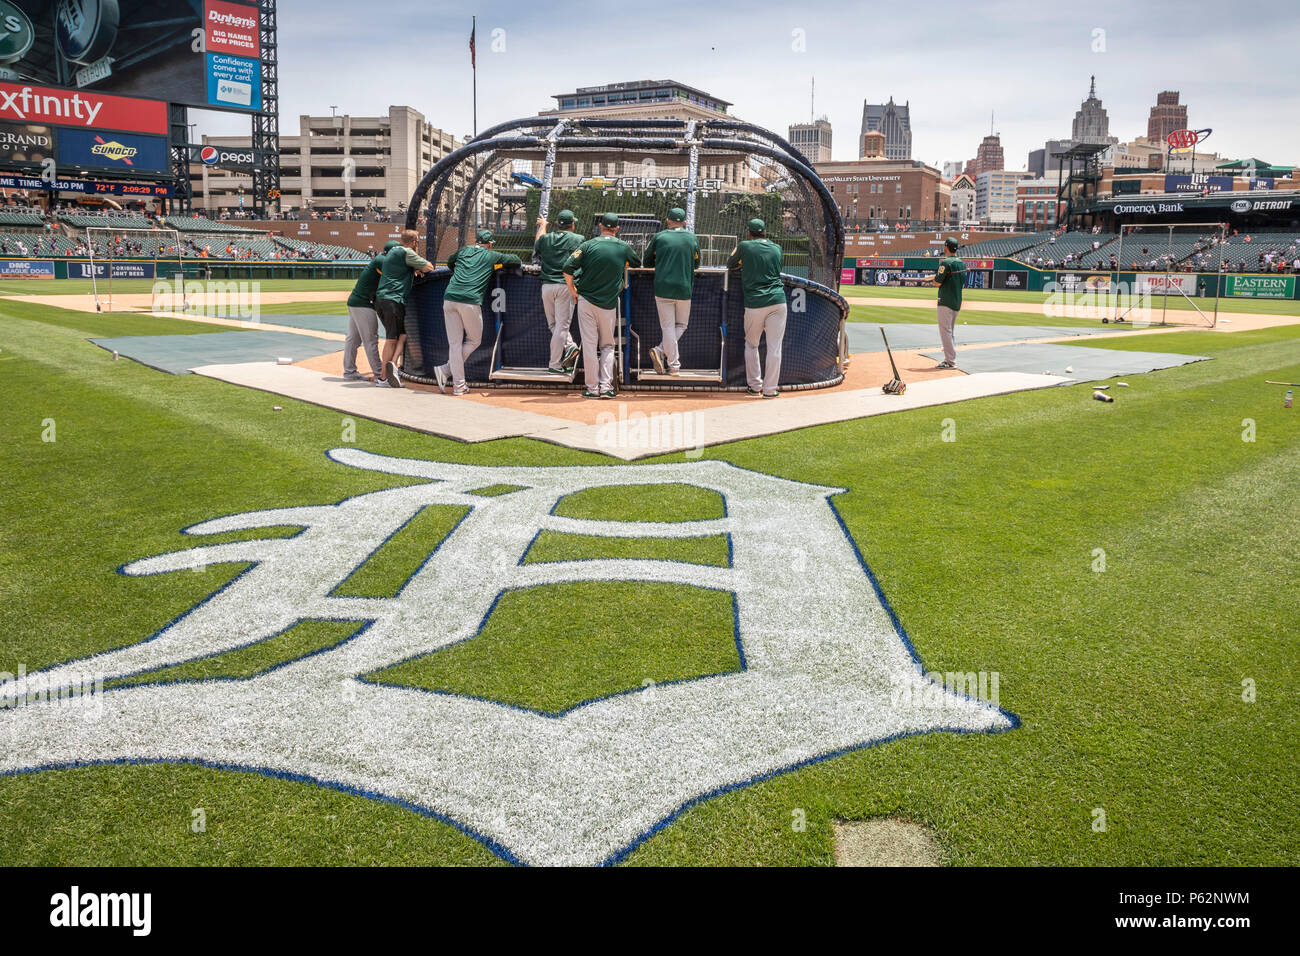 Detroit, Michigan - Members of the Oakland Athletics watch batting practice at Comerica Park before a baseball game against the Detroit Tigers. Stock Photo